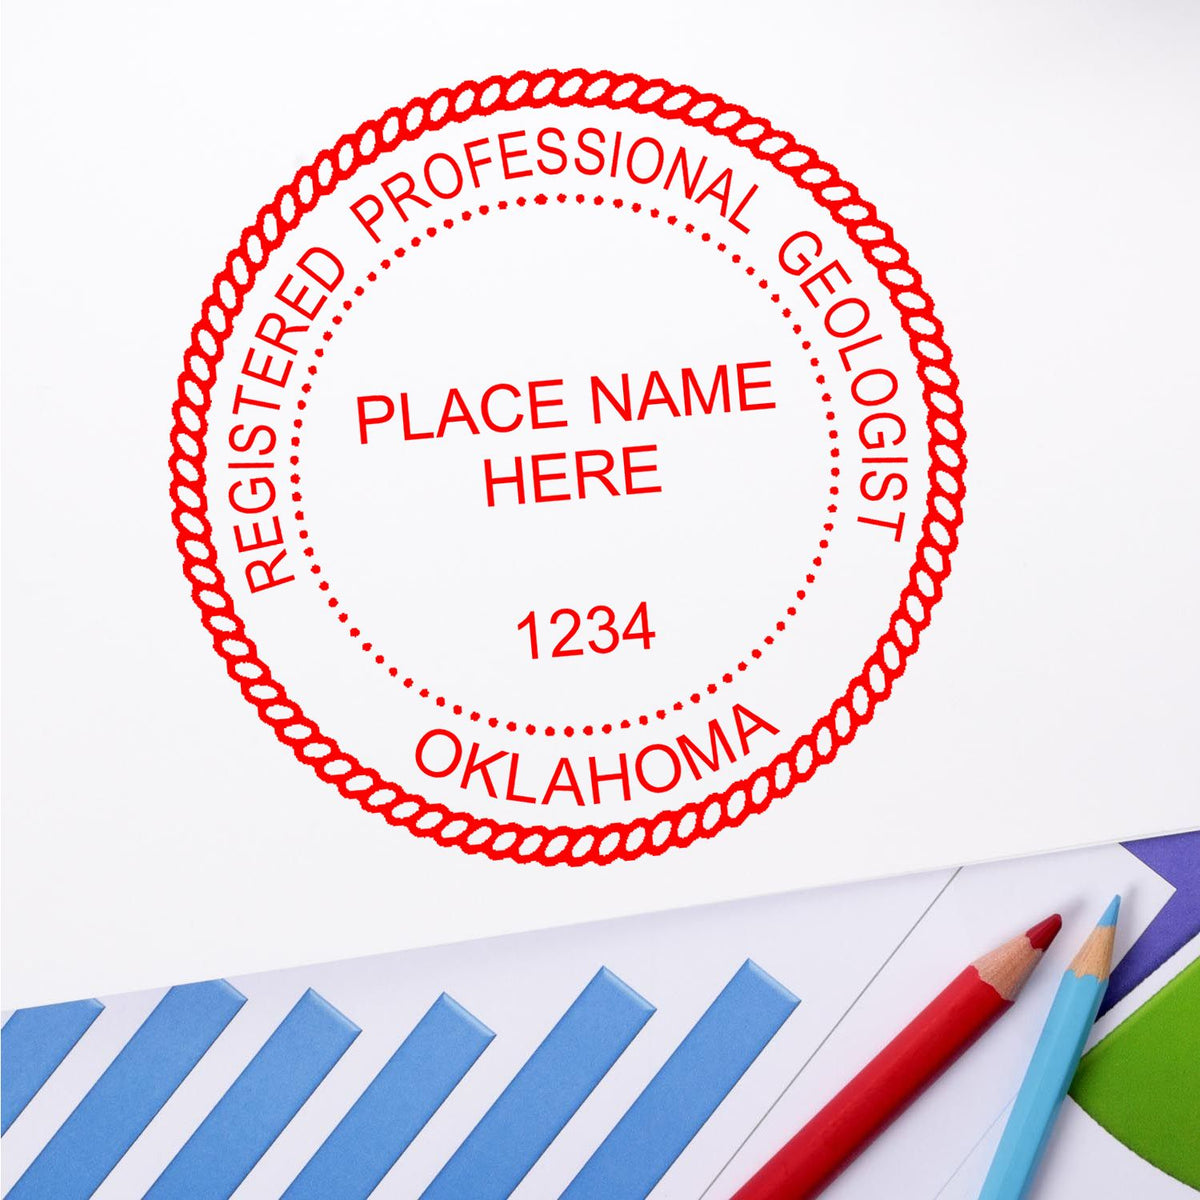 The Digital Oklahoma Geologist Stamp, Electronic Seal for Oklahoma Geologist stamp impression comes to life with a crisp, detailed image stamped on paper - showcasing true professional quality.